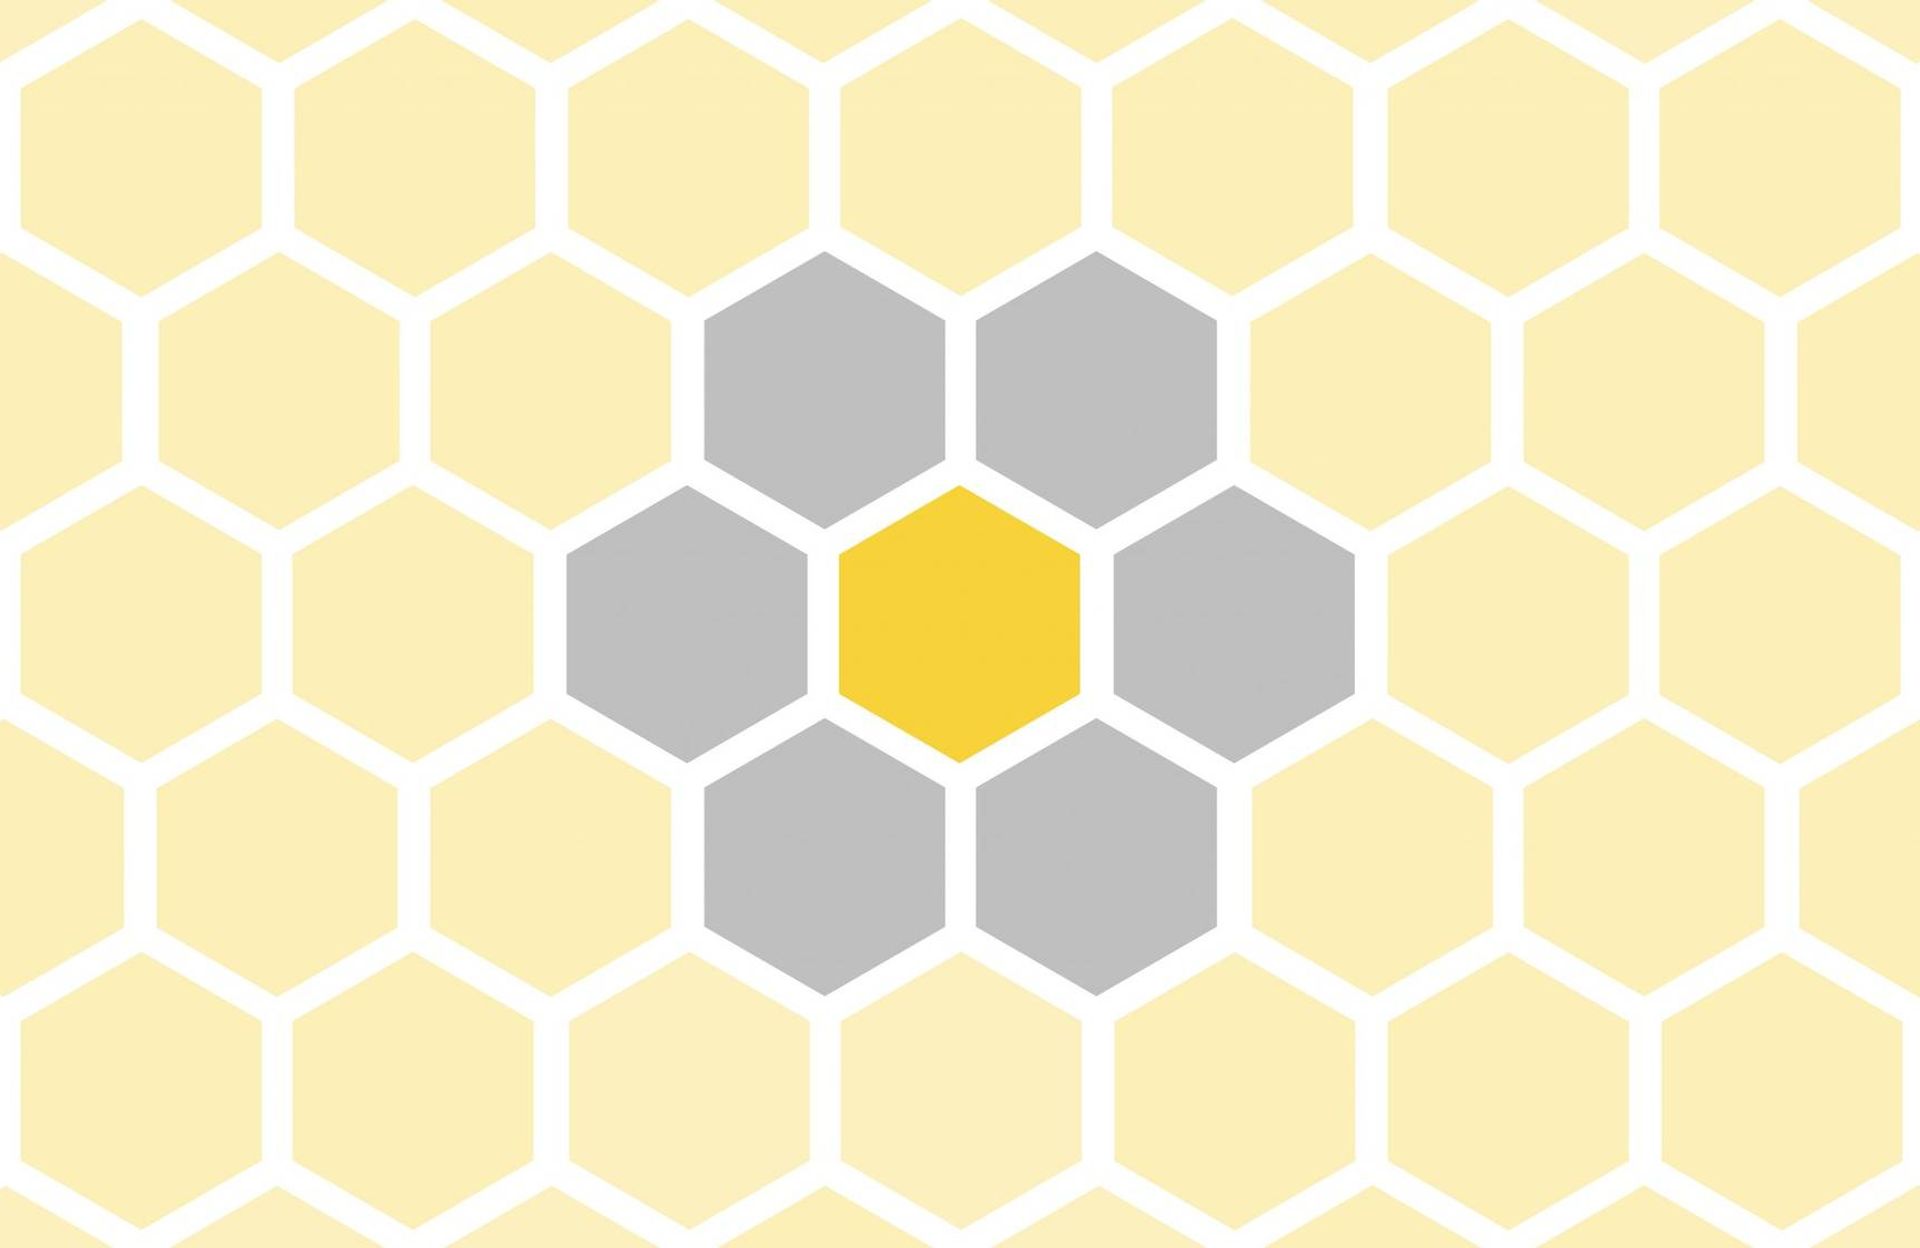 A repeated pattern of hexagonal shapes in a panagram style. Next Avenue, Spelling Bee Game, panagram